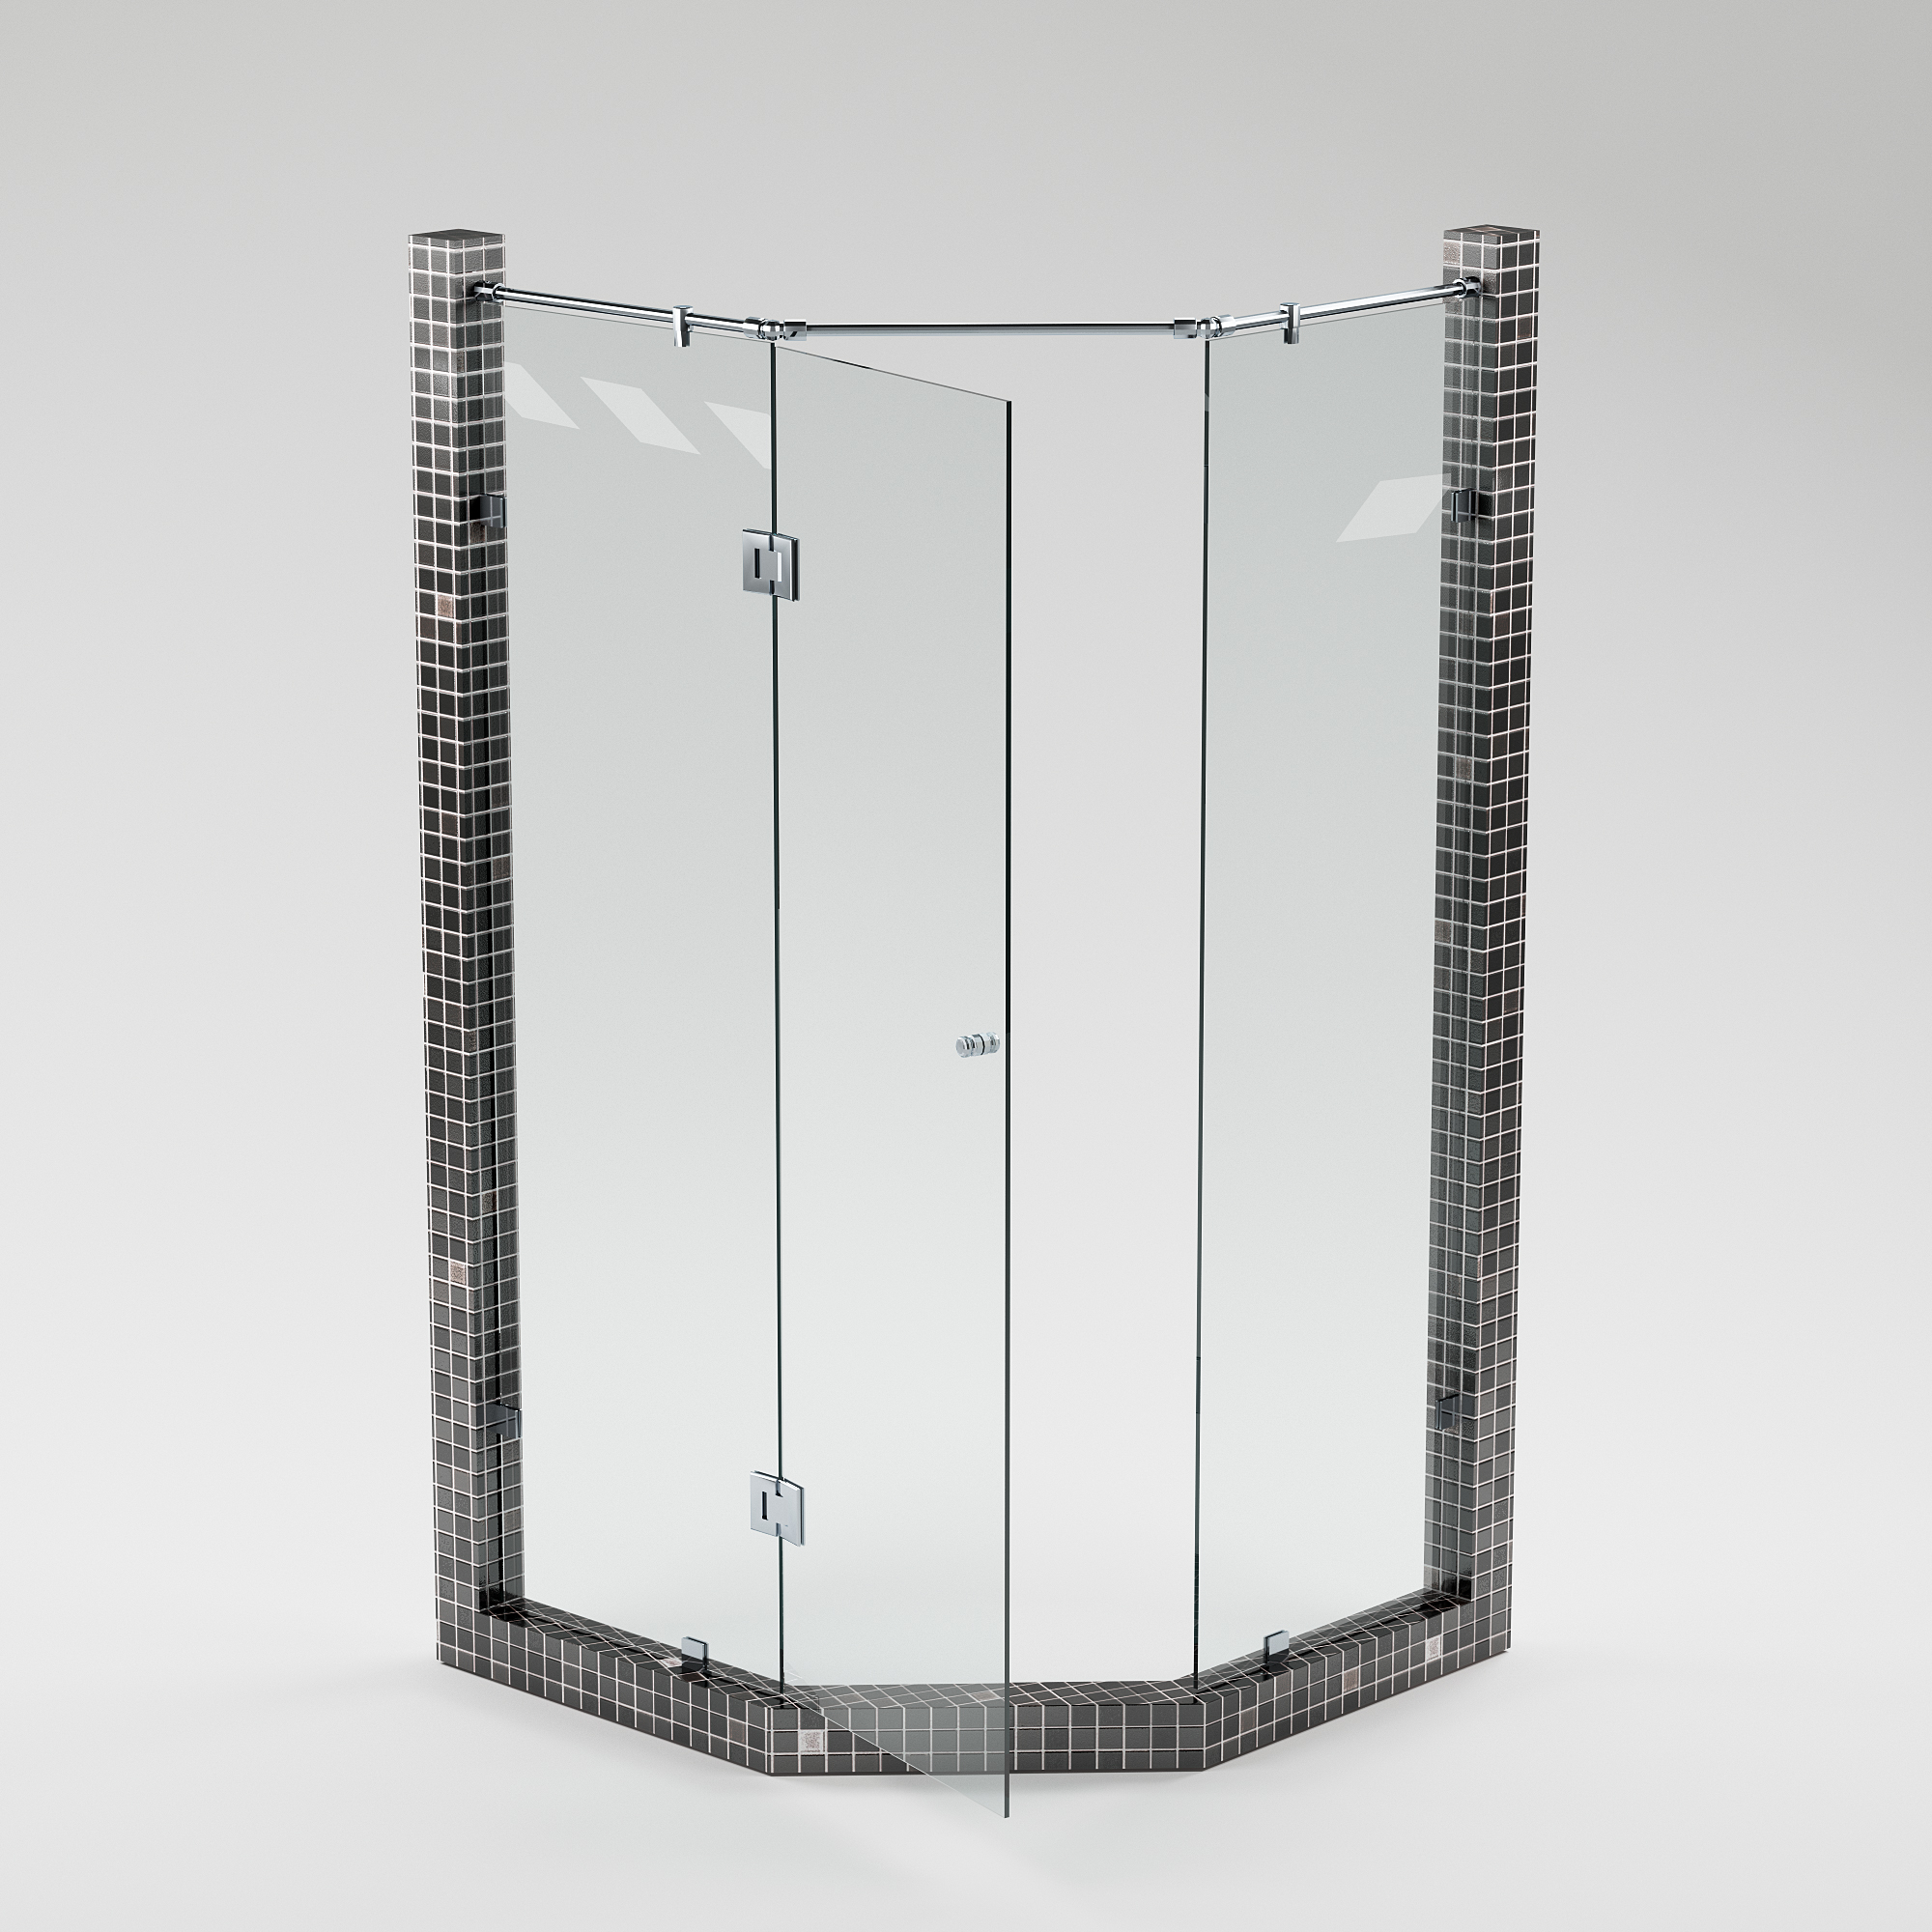 Articles made of glass in 3d max vray 3.0 image